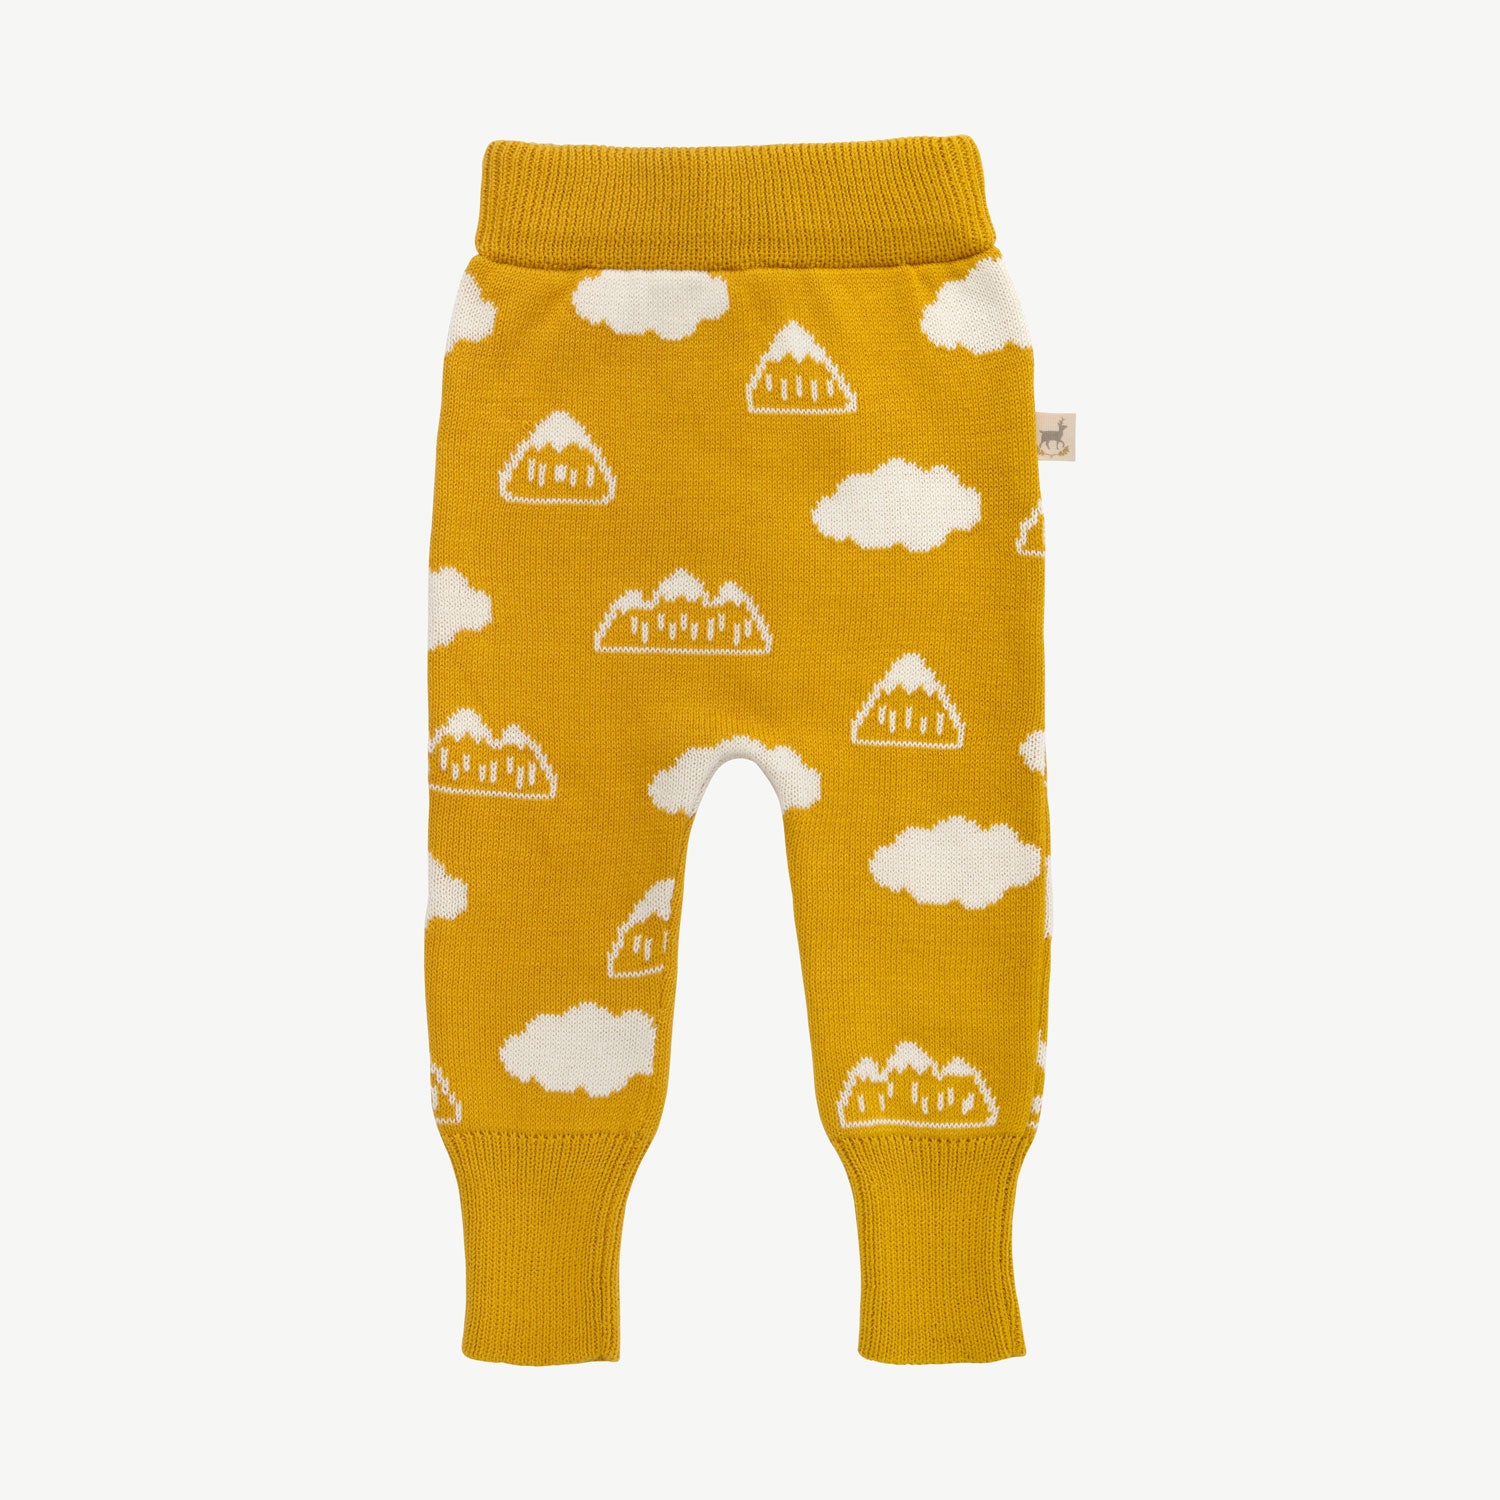 'mountain's view' nugget gold knit pants